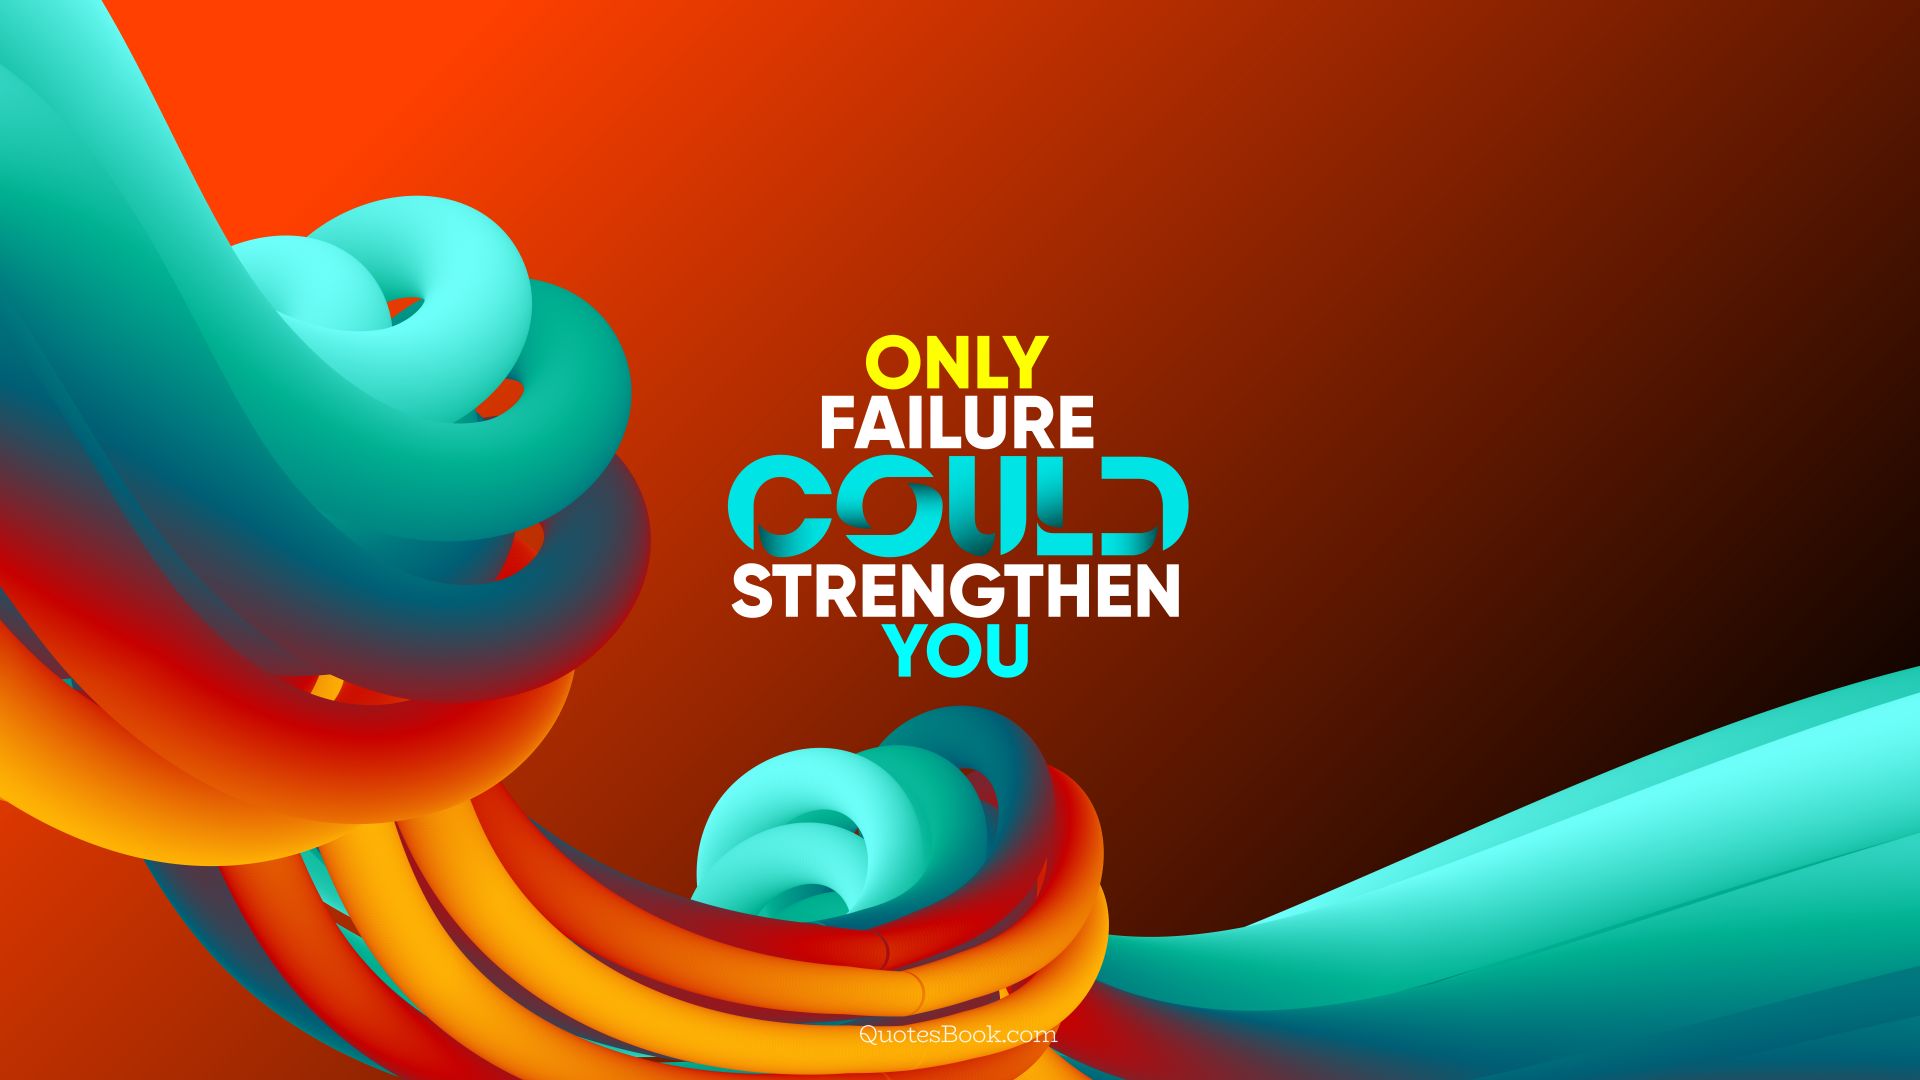 Only failure could strengthen you. - Quote by QuotesBook